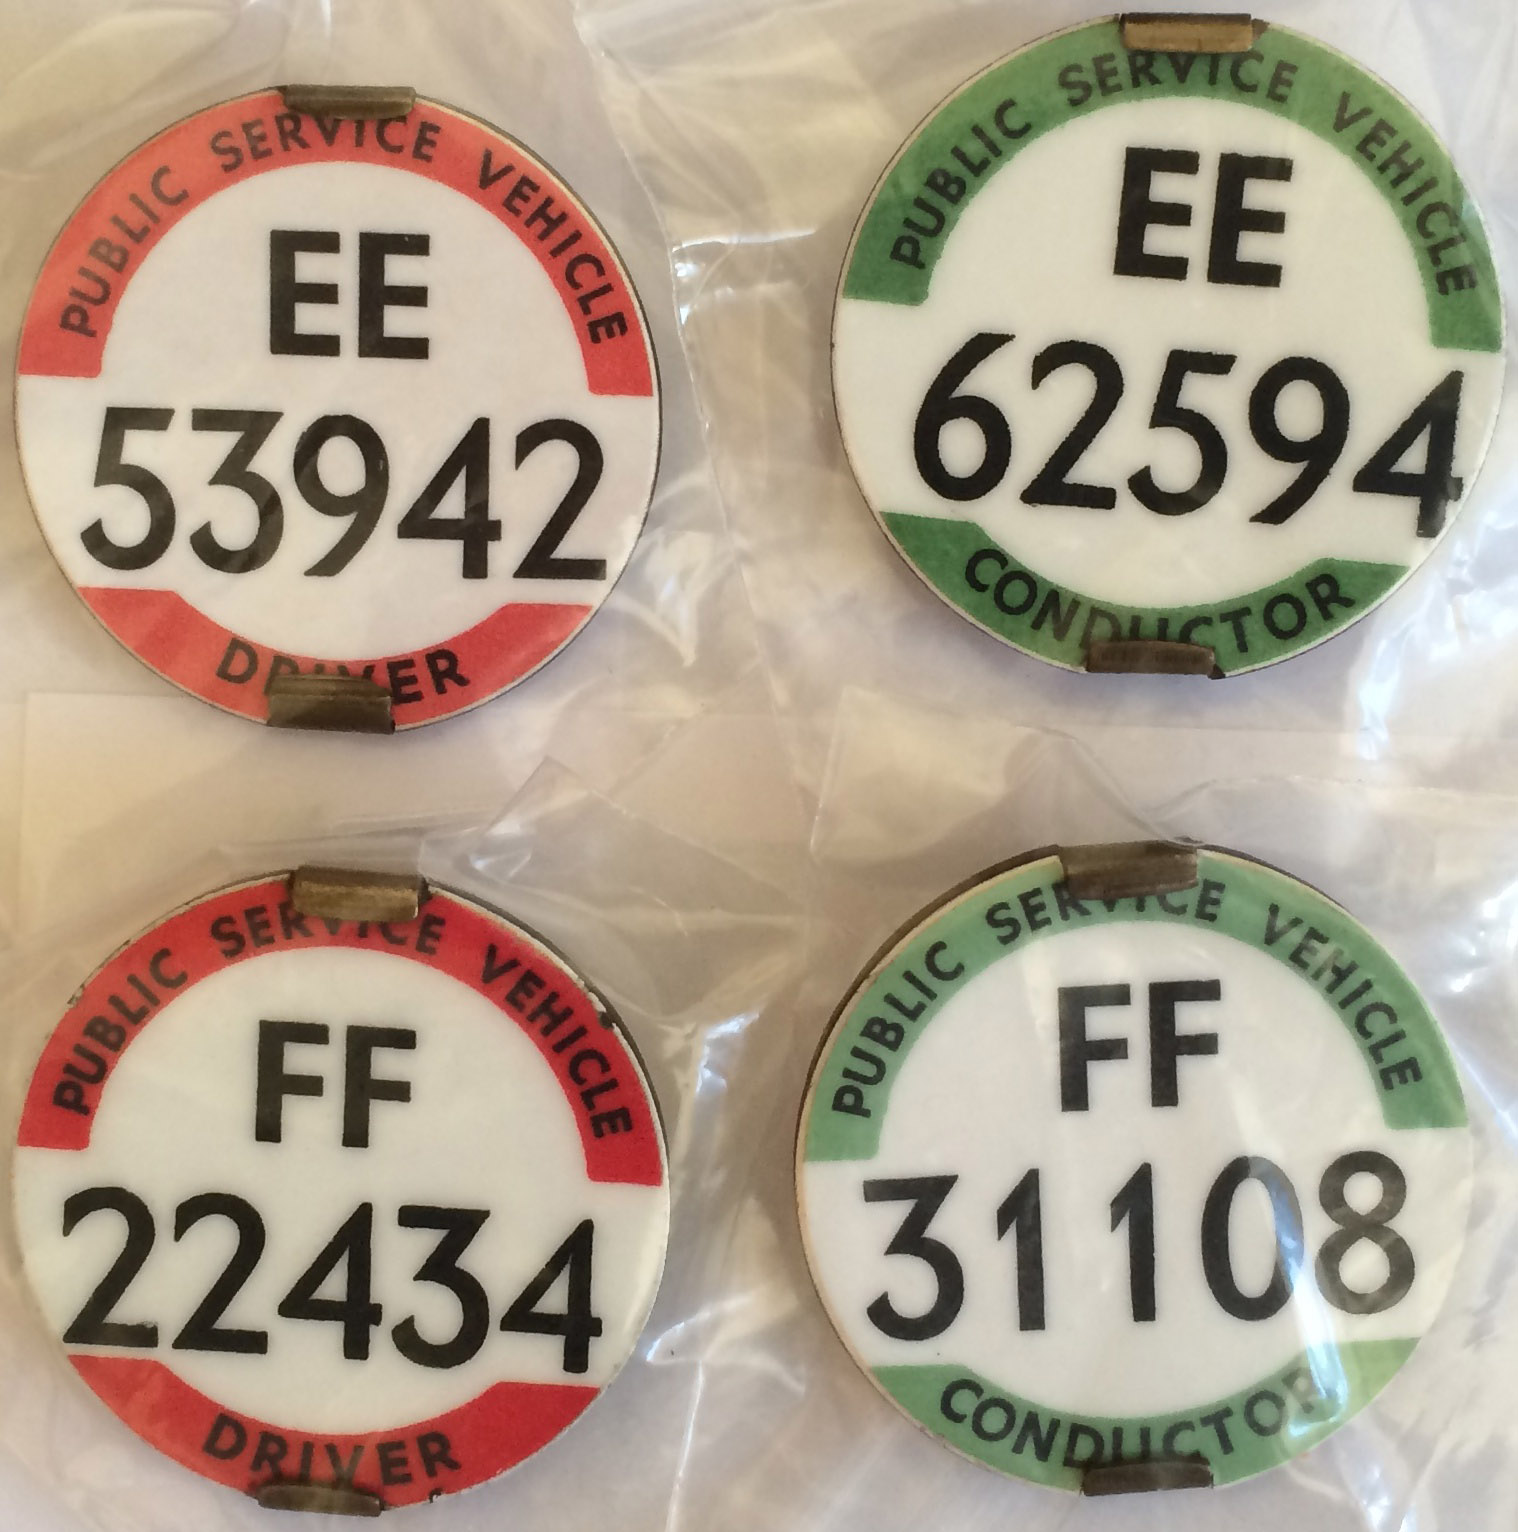 Sets of bus Driver's and Conductor's PSV BADGES for the East Midland & Eastern (EE & FF) Regions